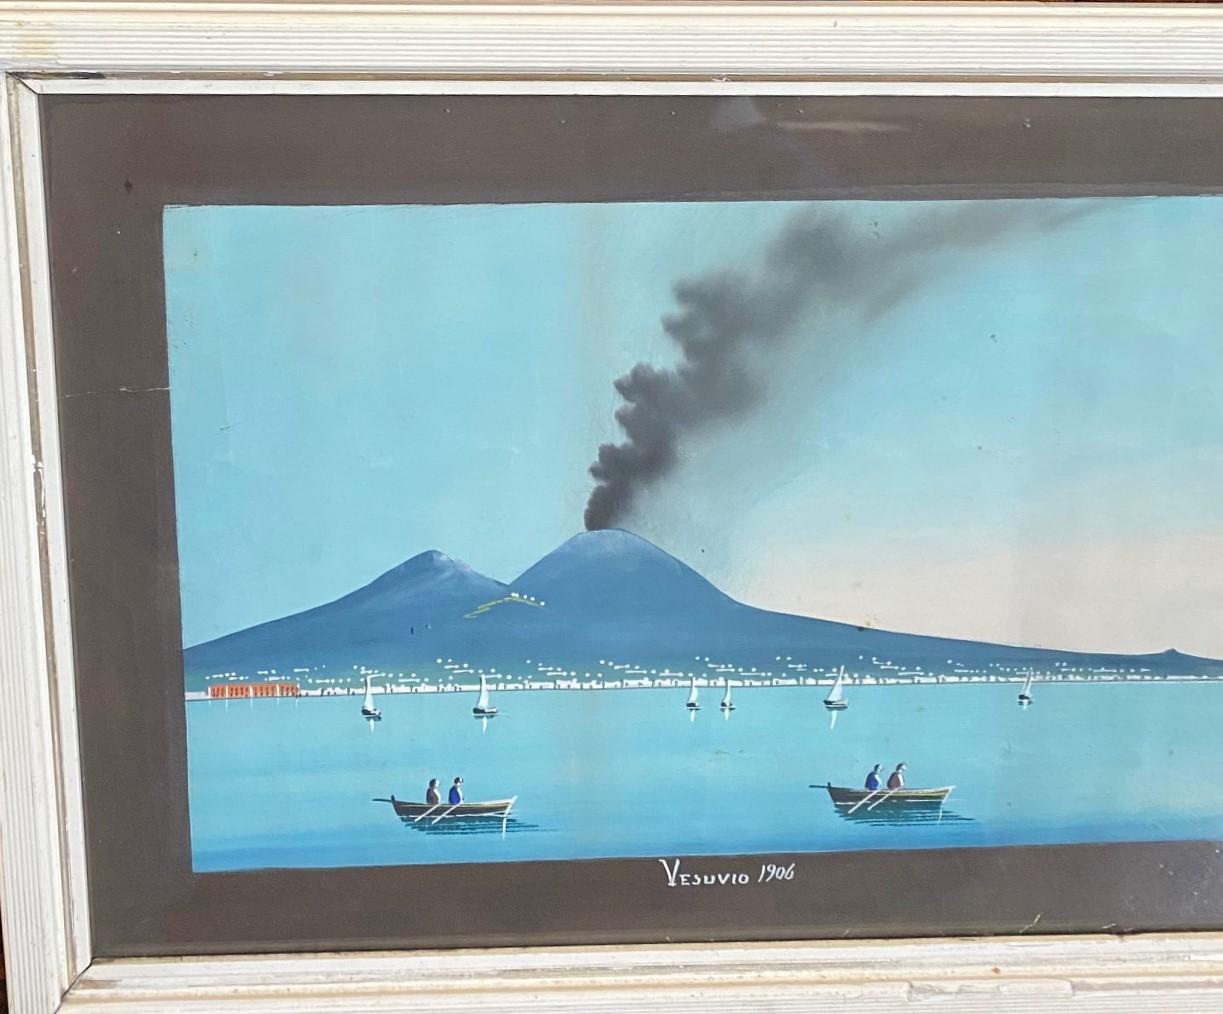 Antique Bay of Naples Gouache Seascape with Vesuvius Erupting, 1906, a fine gouache on paper seascape with the panoramic Bay of Naples stretching wide, with Mt Vesuvius erupting in the background, two Neapolitan fishing boats in the foreground,